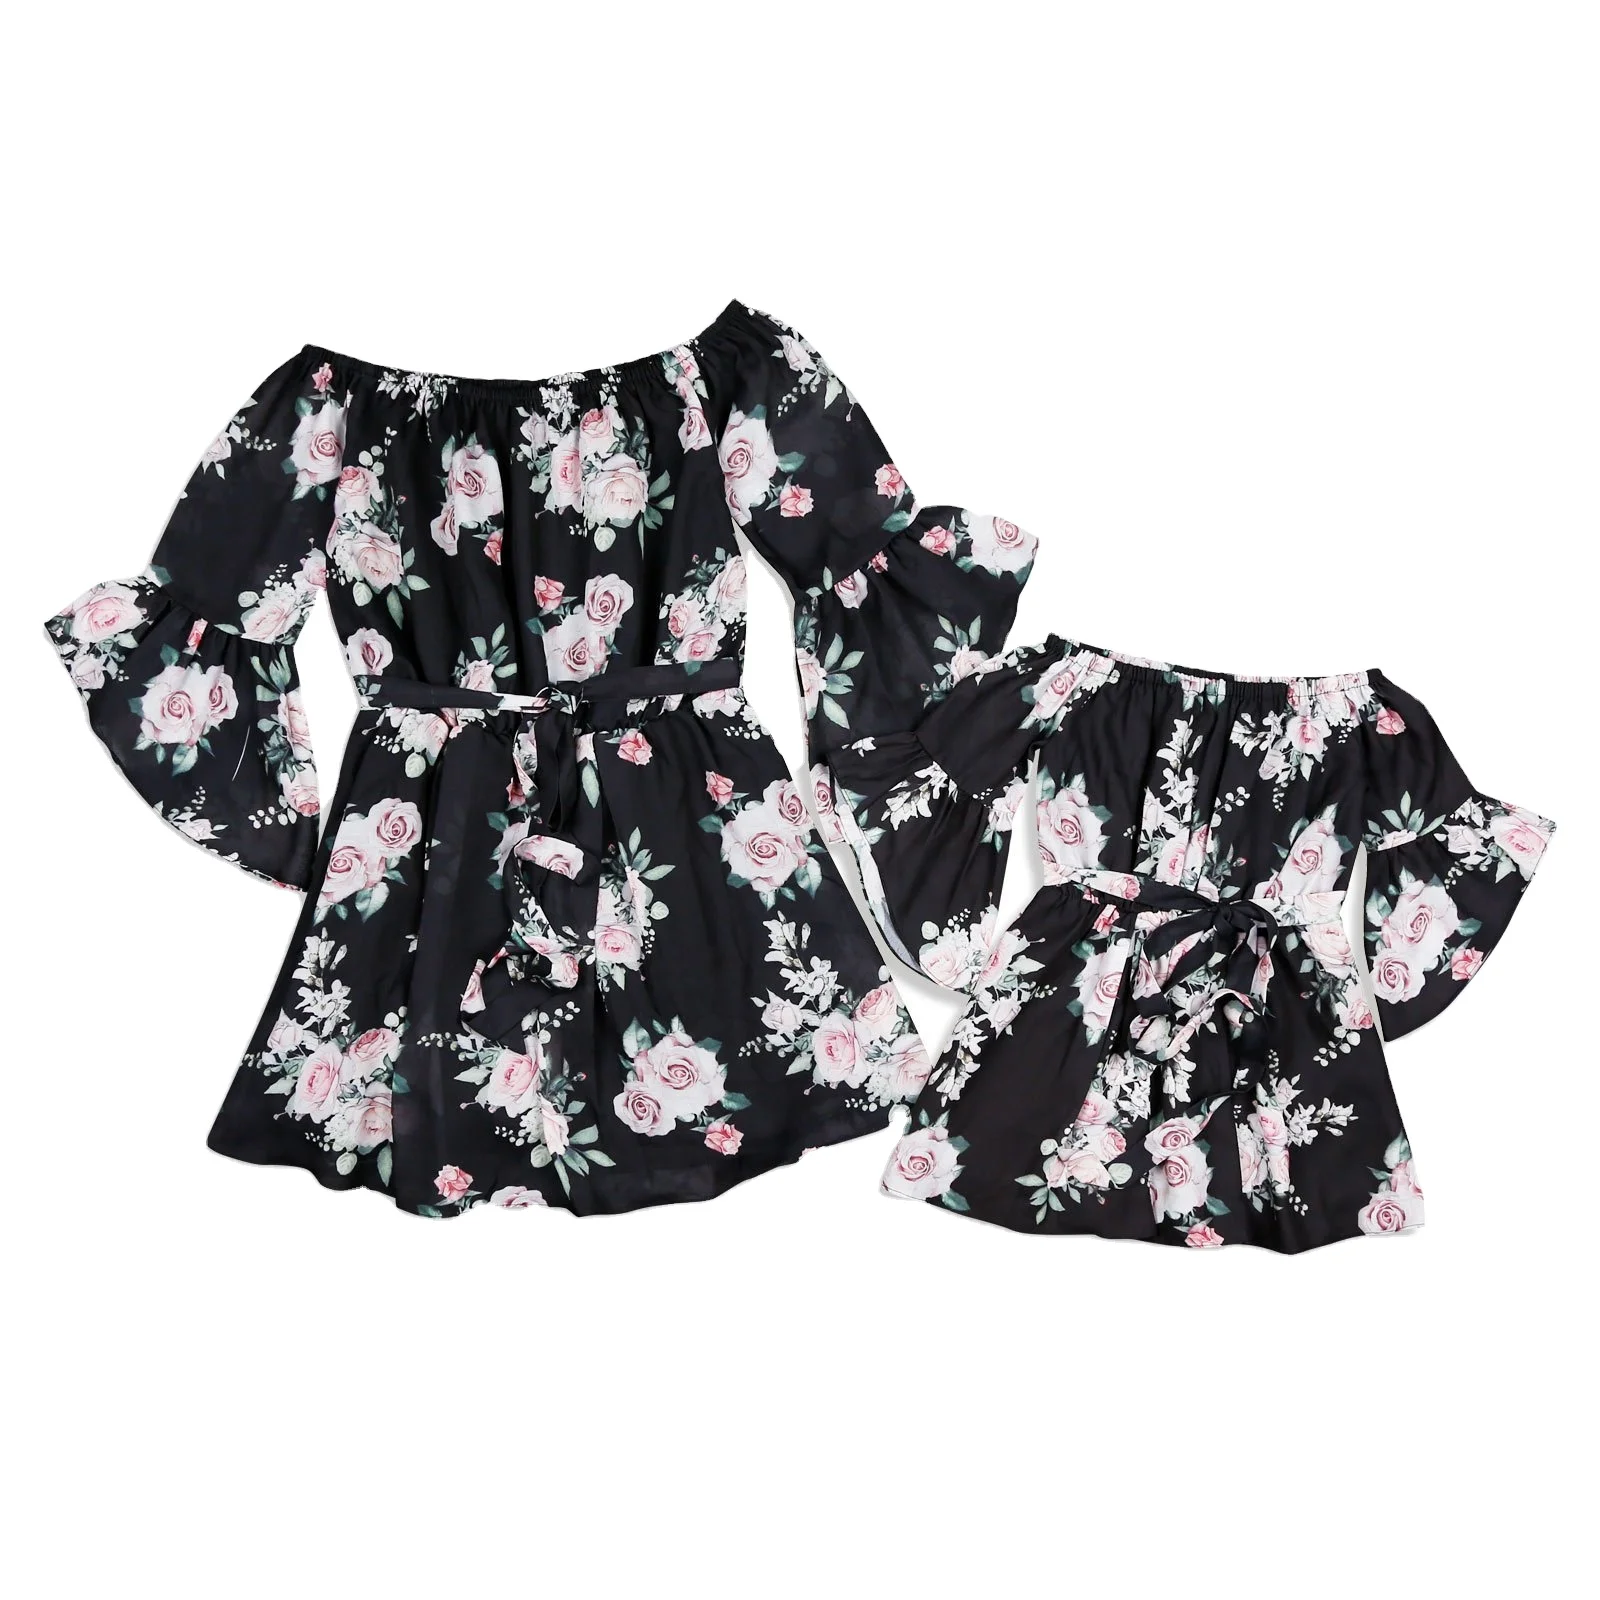 
2020 new European and American explosion models mother and daughter parent child dress word shoulder print ruffle dress  (1600078086338)